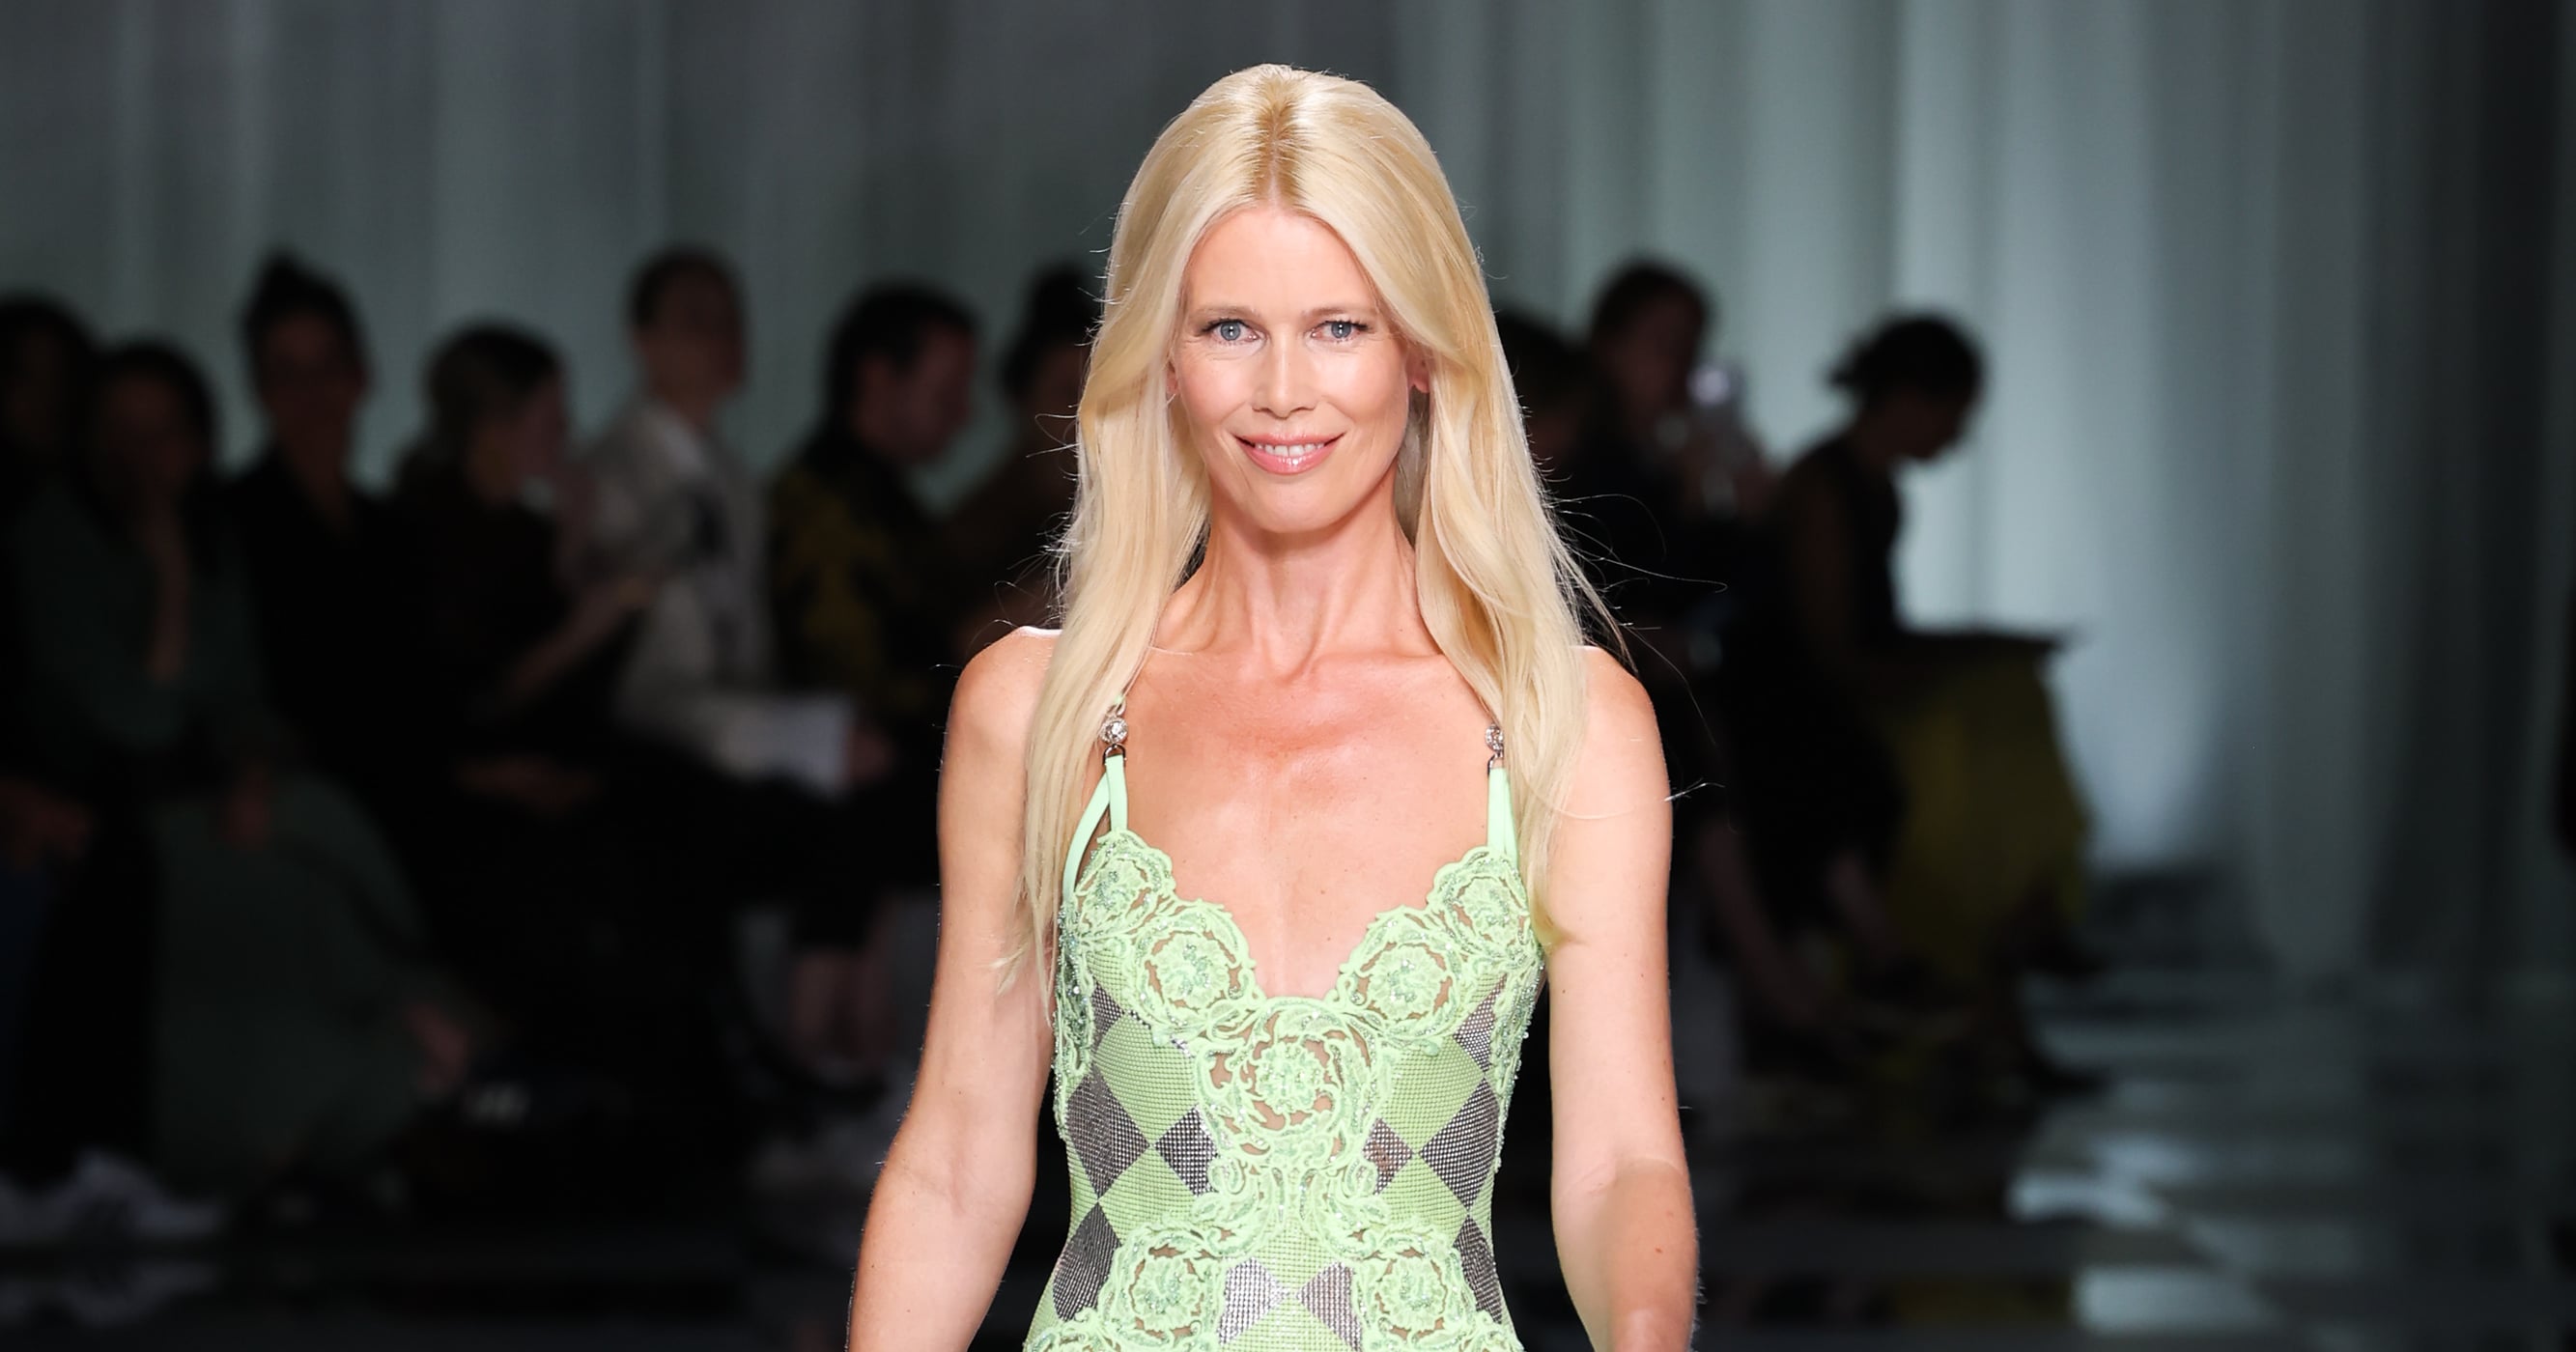 Versace couture fashion show: Paris wowed by show of chiffon-clad